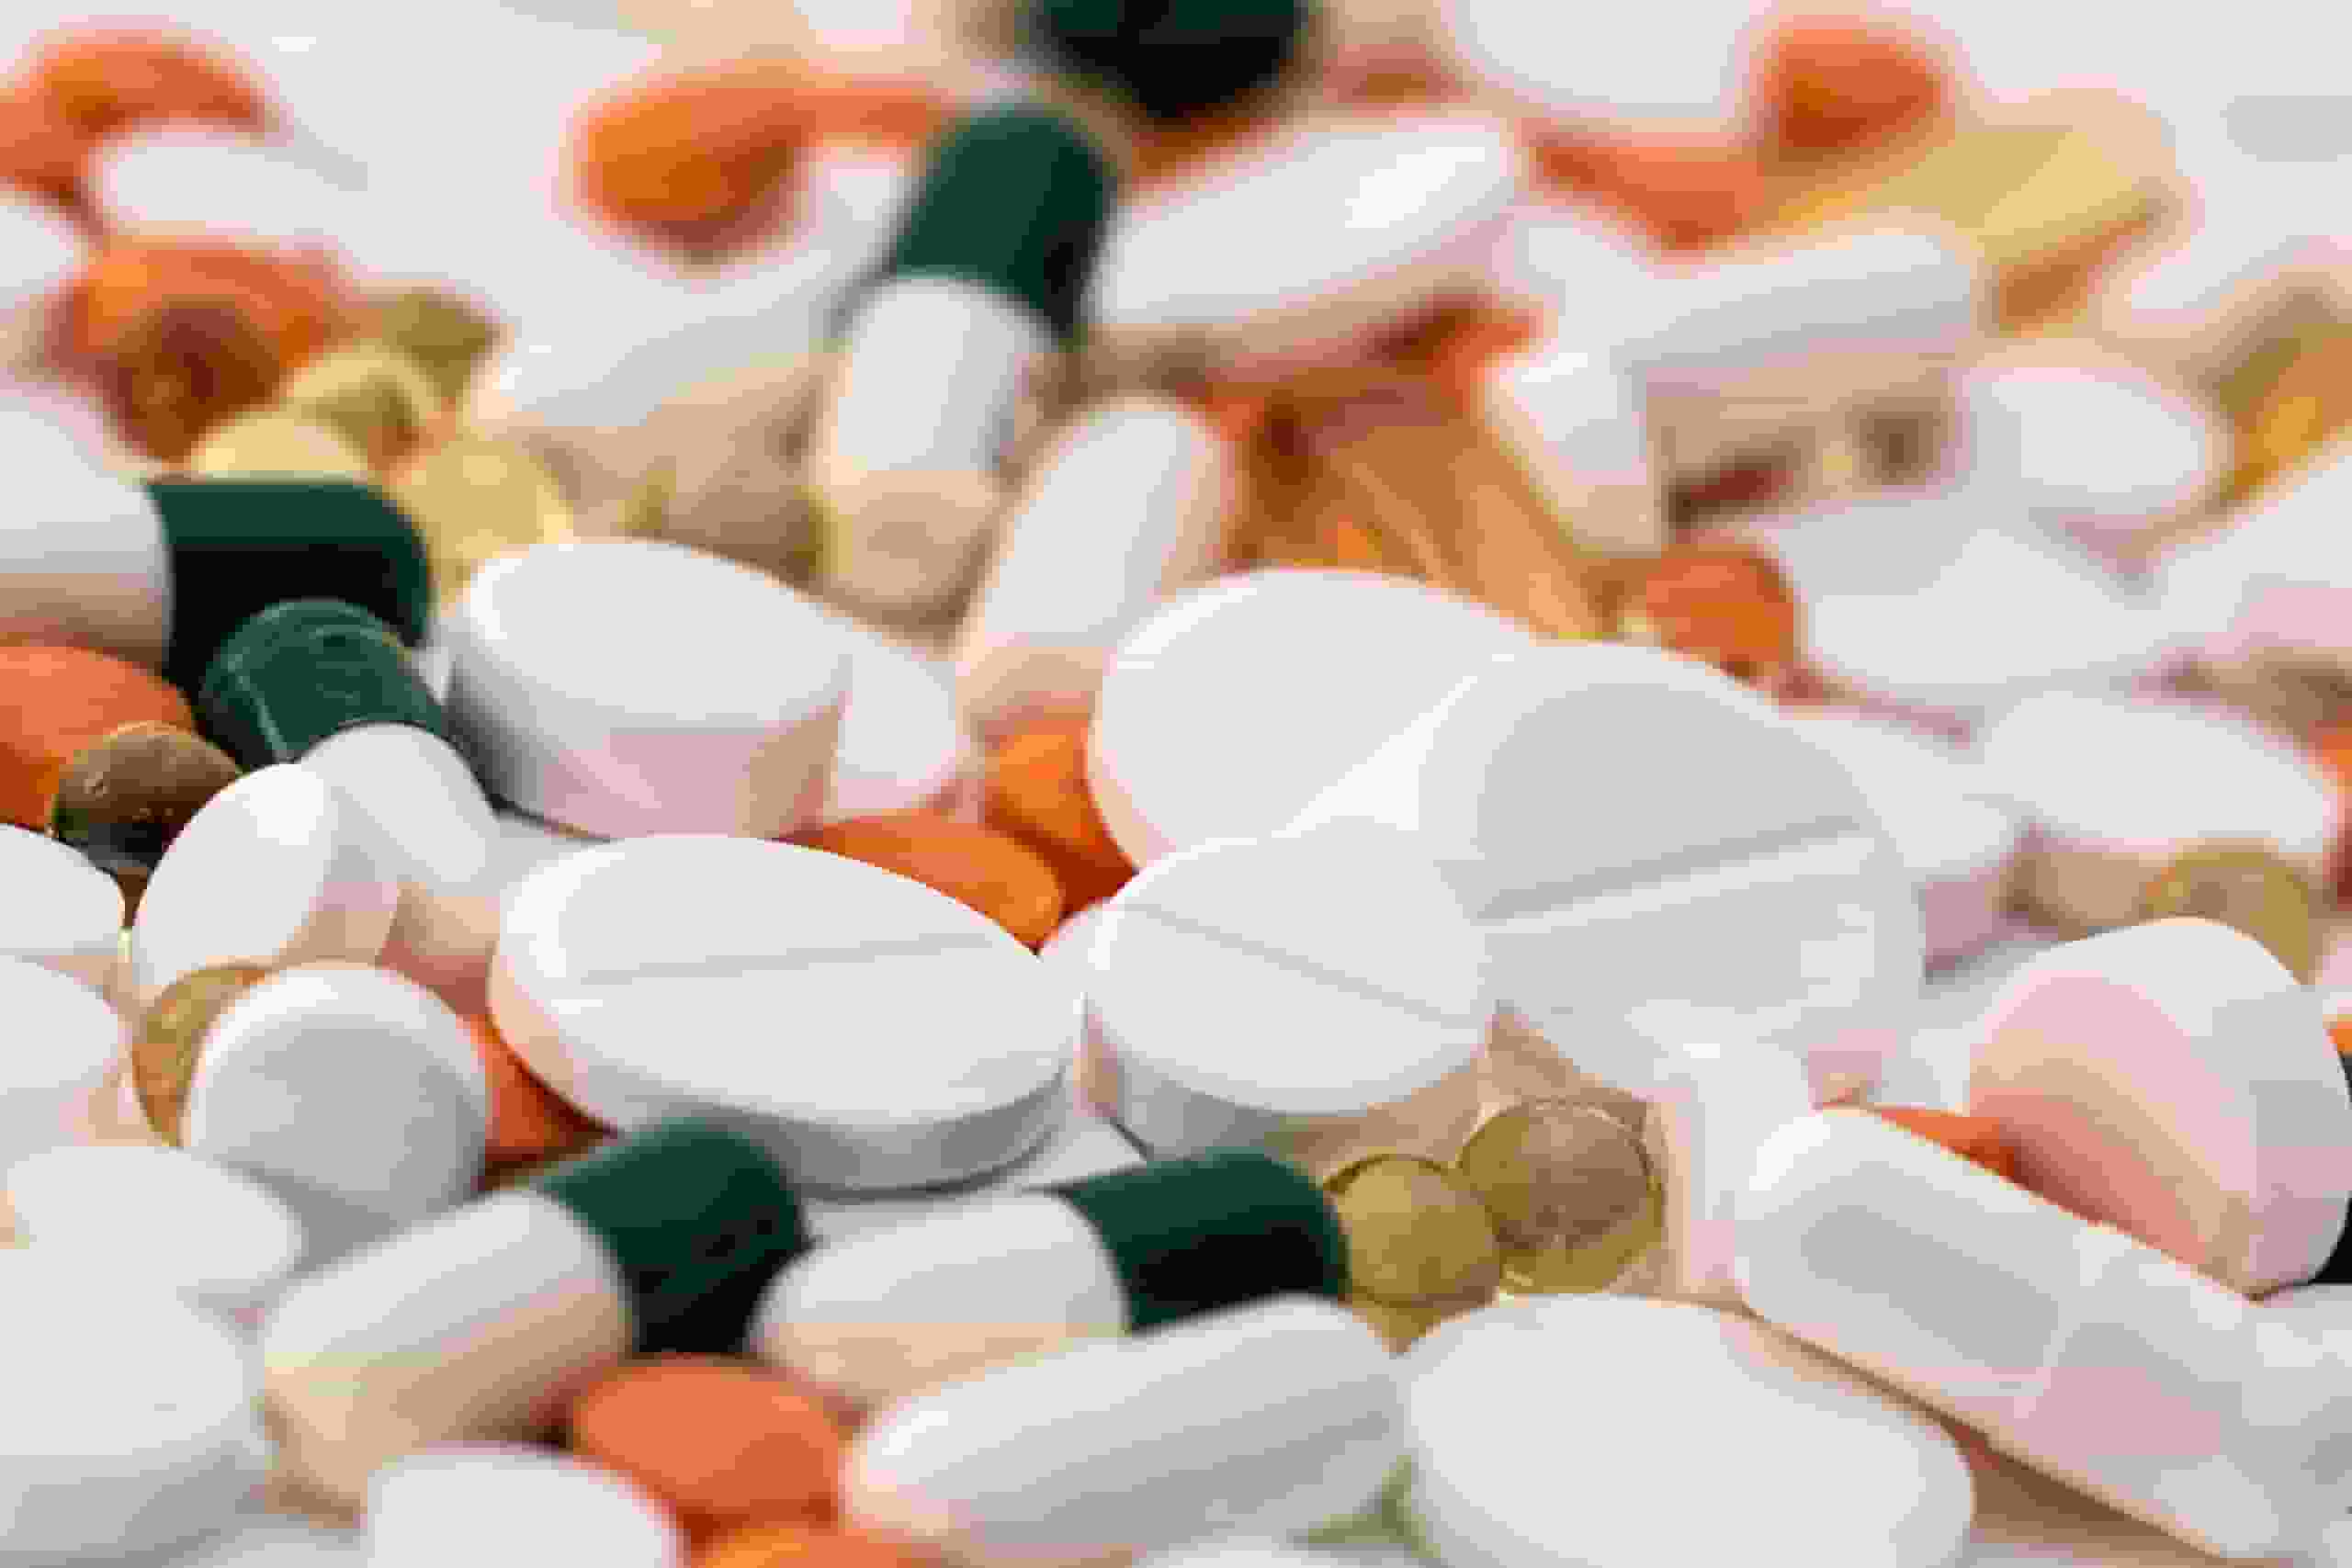 Rising-Overdose-Deaths-In-The-US-Linked-To-Surge-In-Counterfeit-Medications-Report-CDC